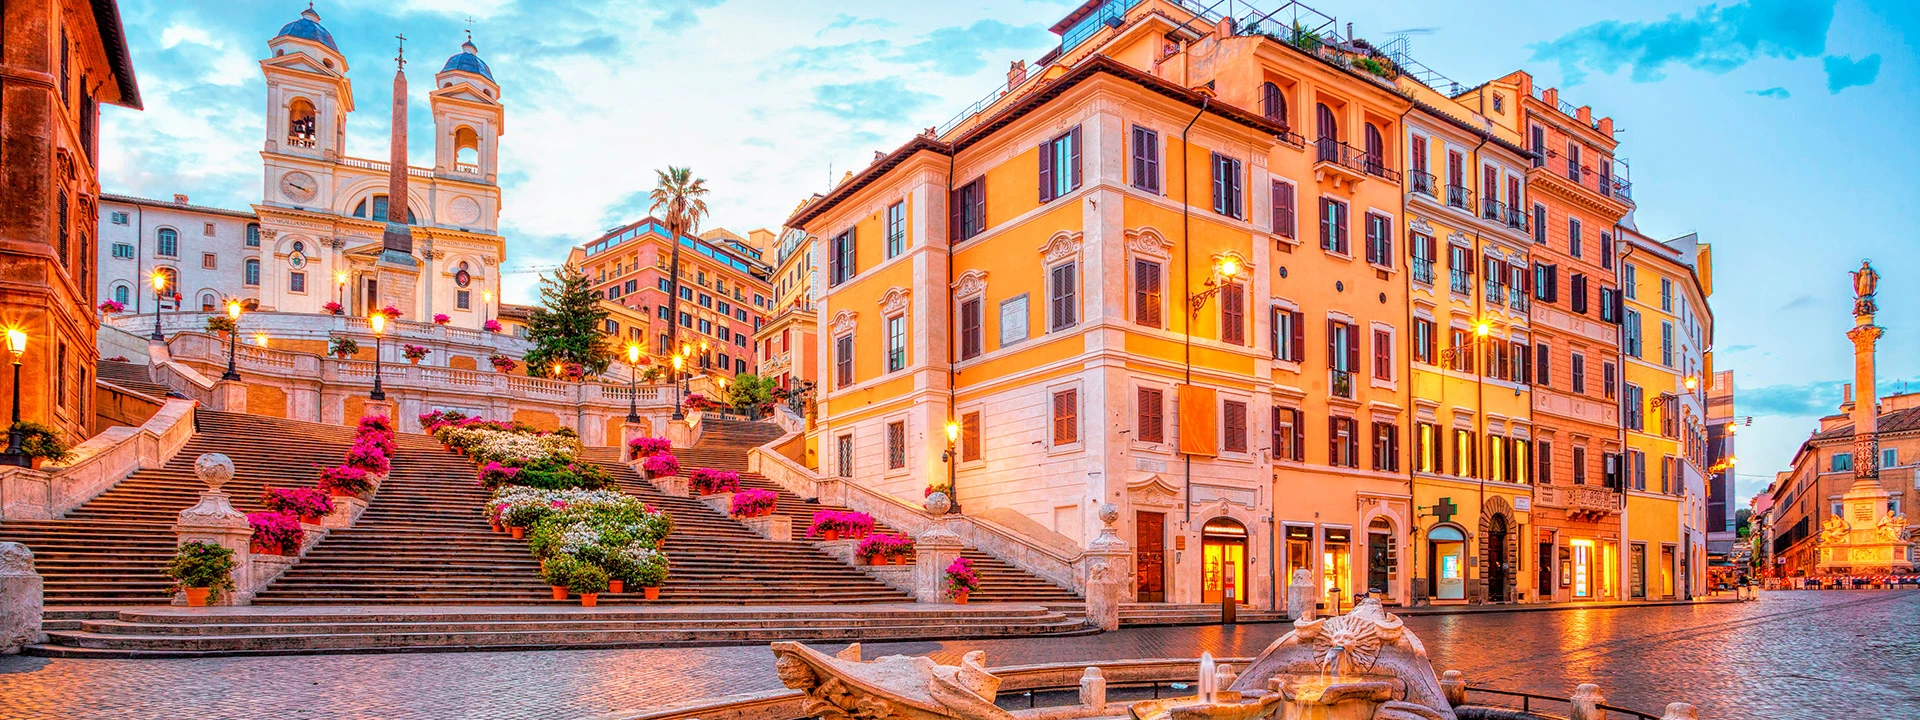 Piazza di Spagna and The Spanish Steps in Rome with Mediterranean cruises